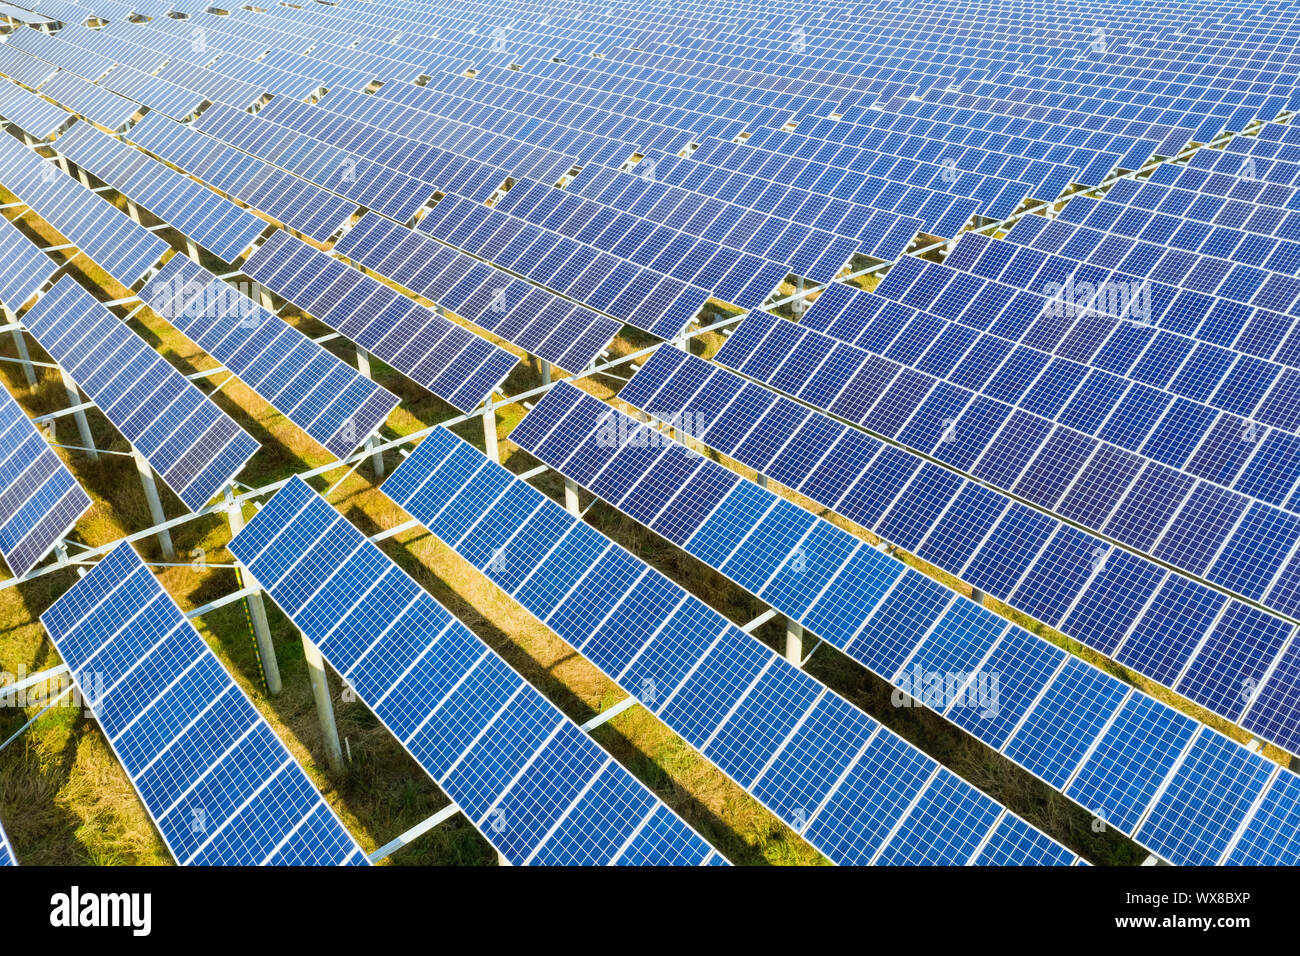 aerial view of solar panels Stock Photo